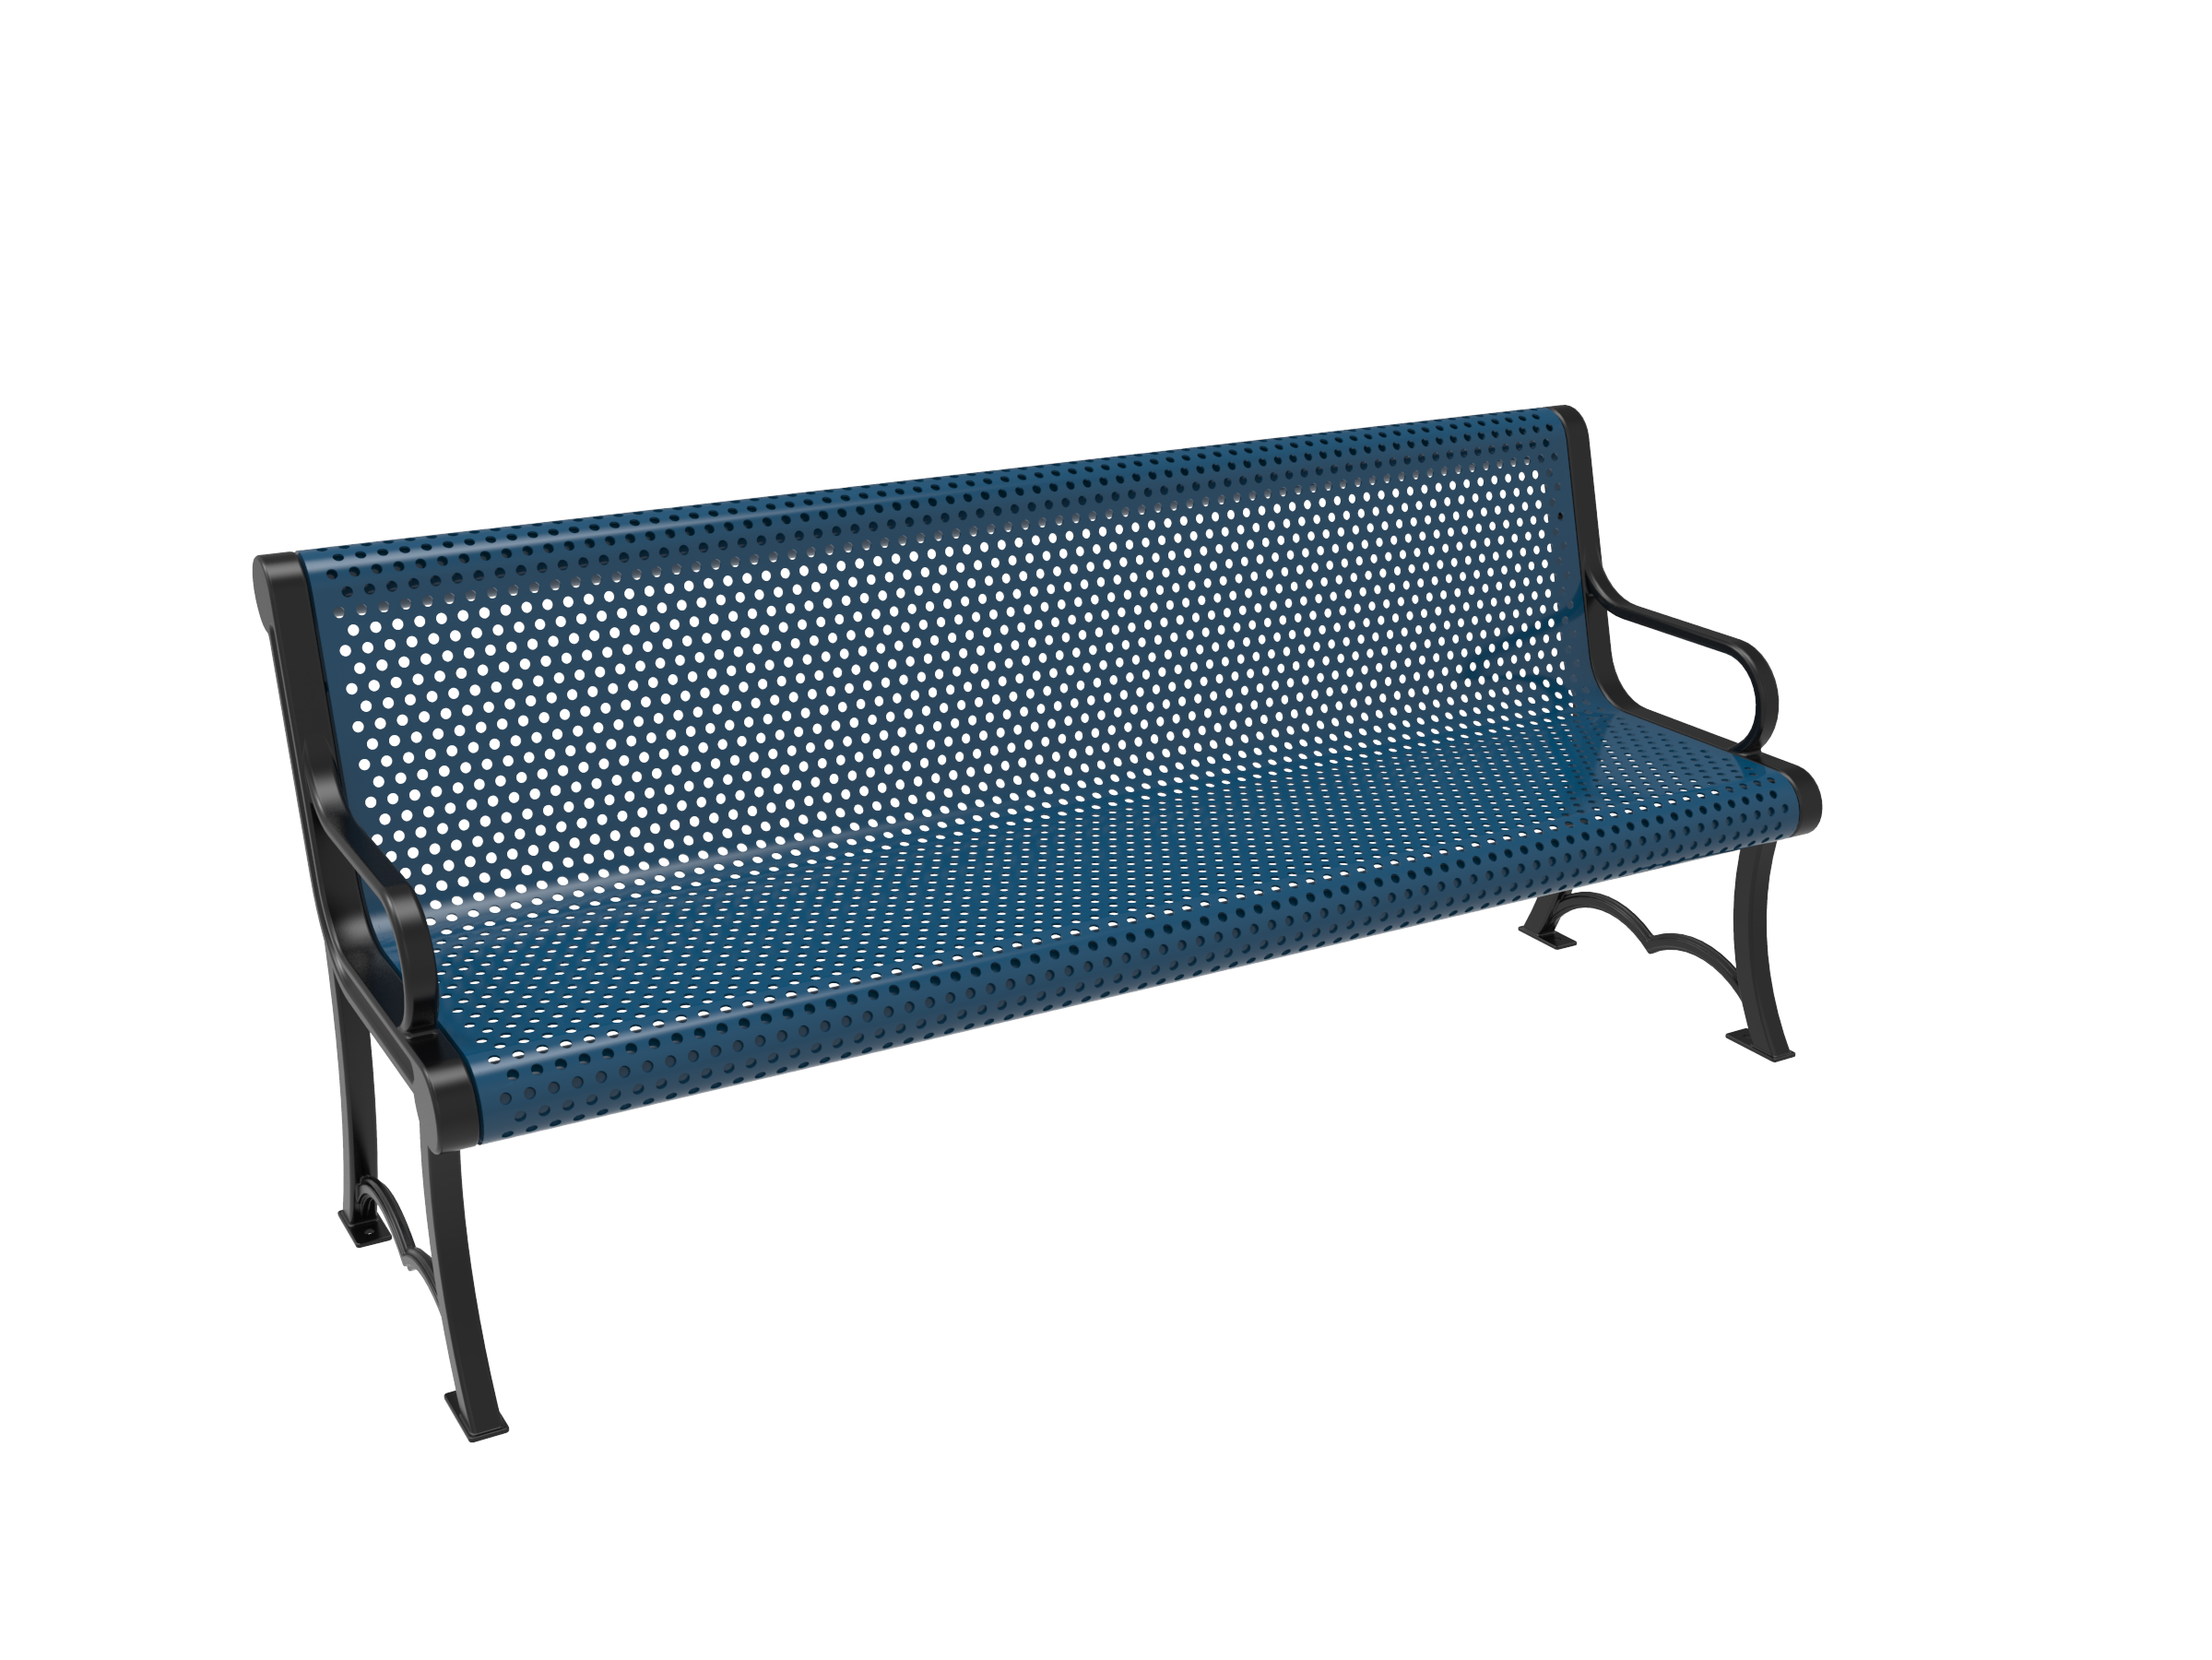 Rivendale Austin Bench with Arm